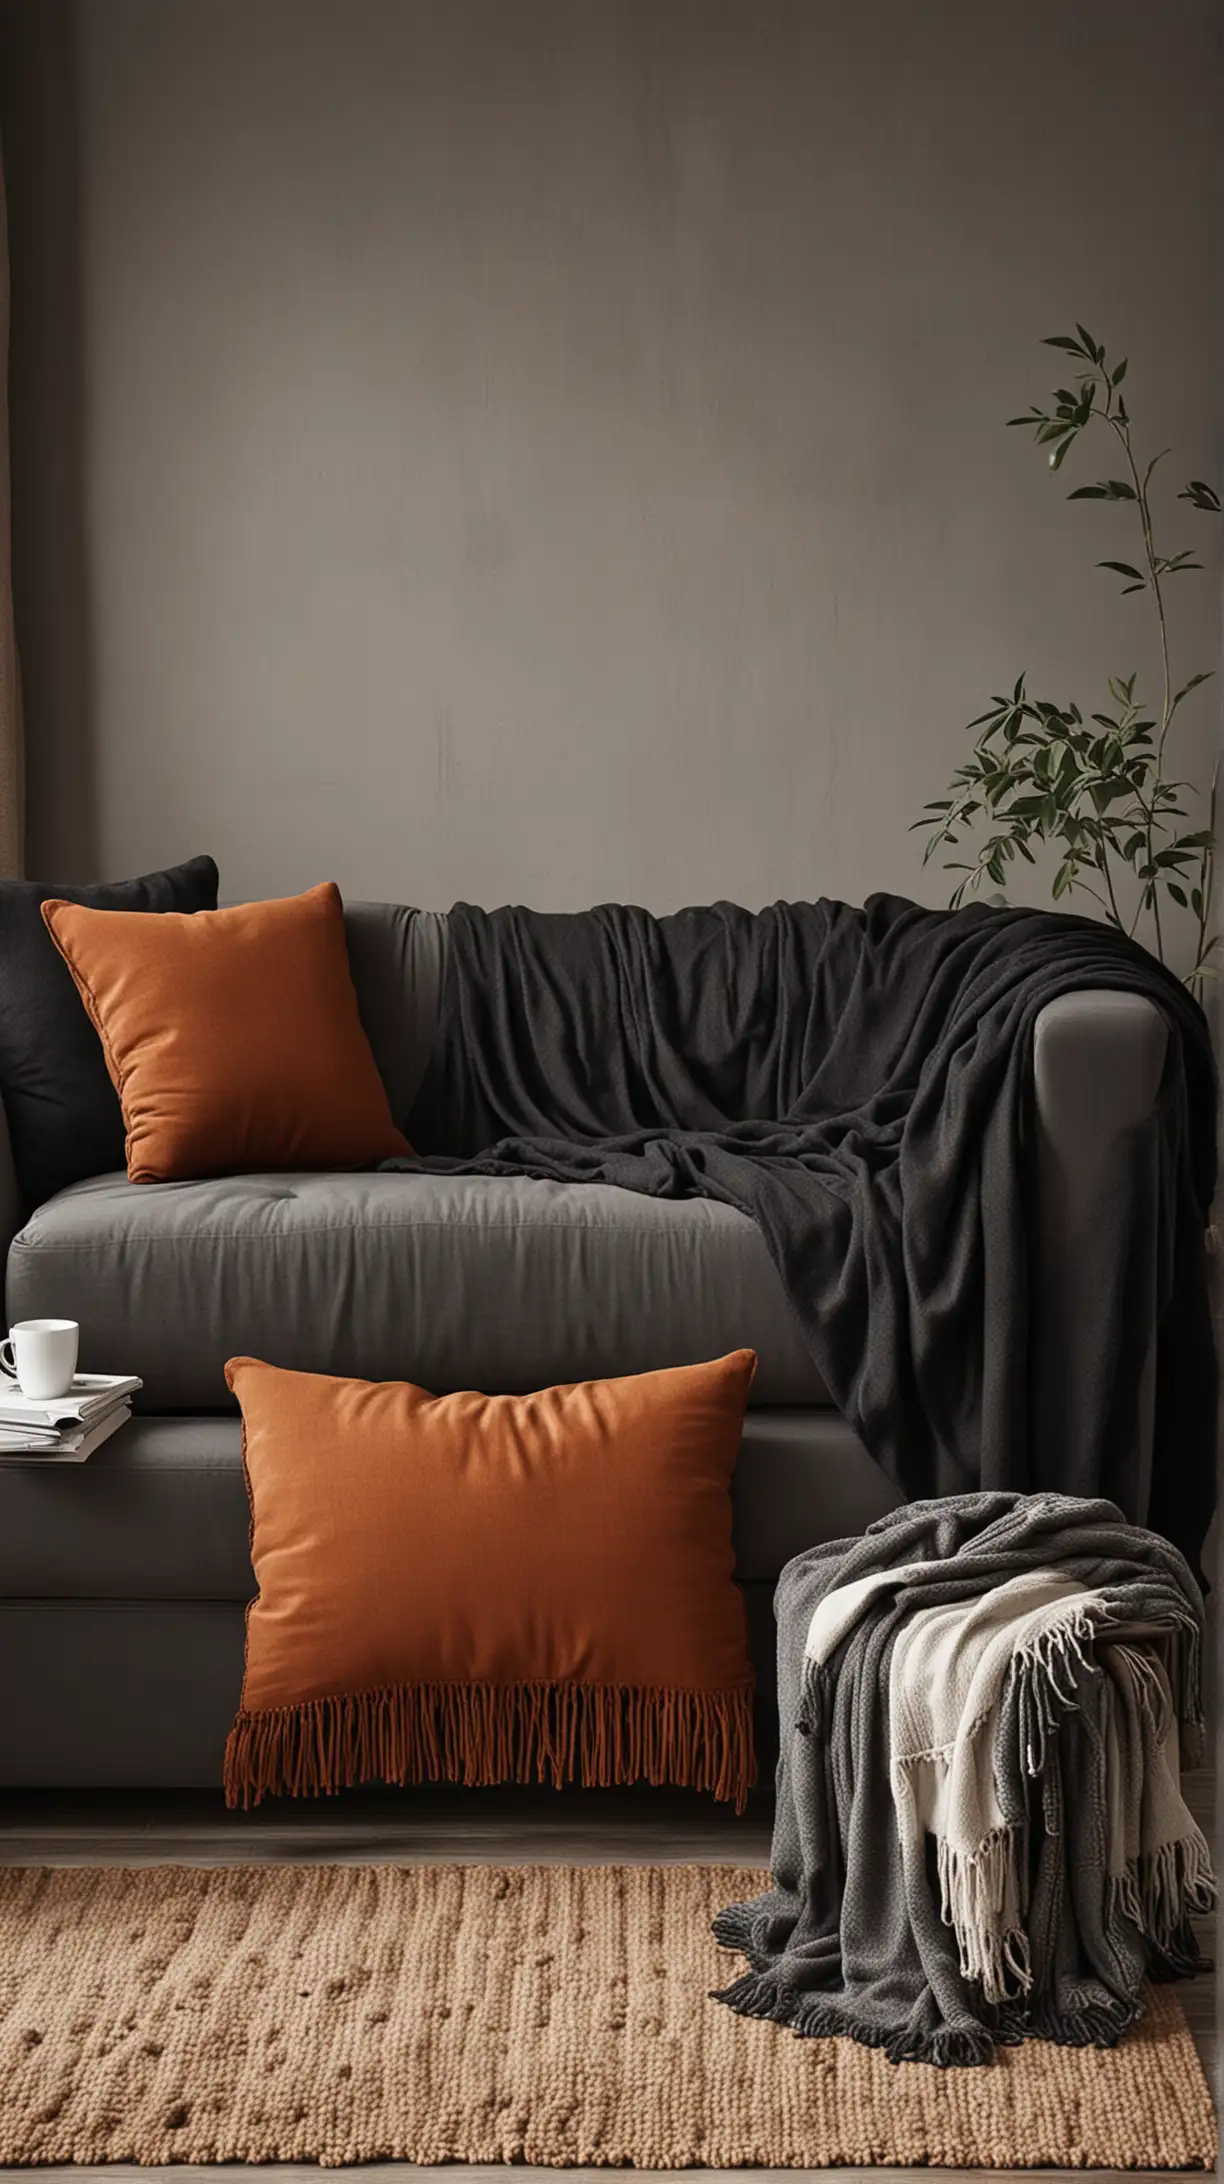 Rust and Black Theme Living Room with Layered Throw Blankets